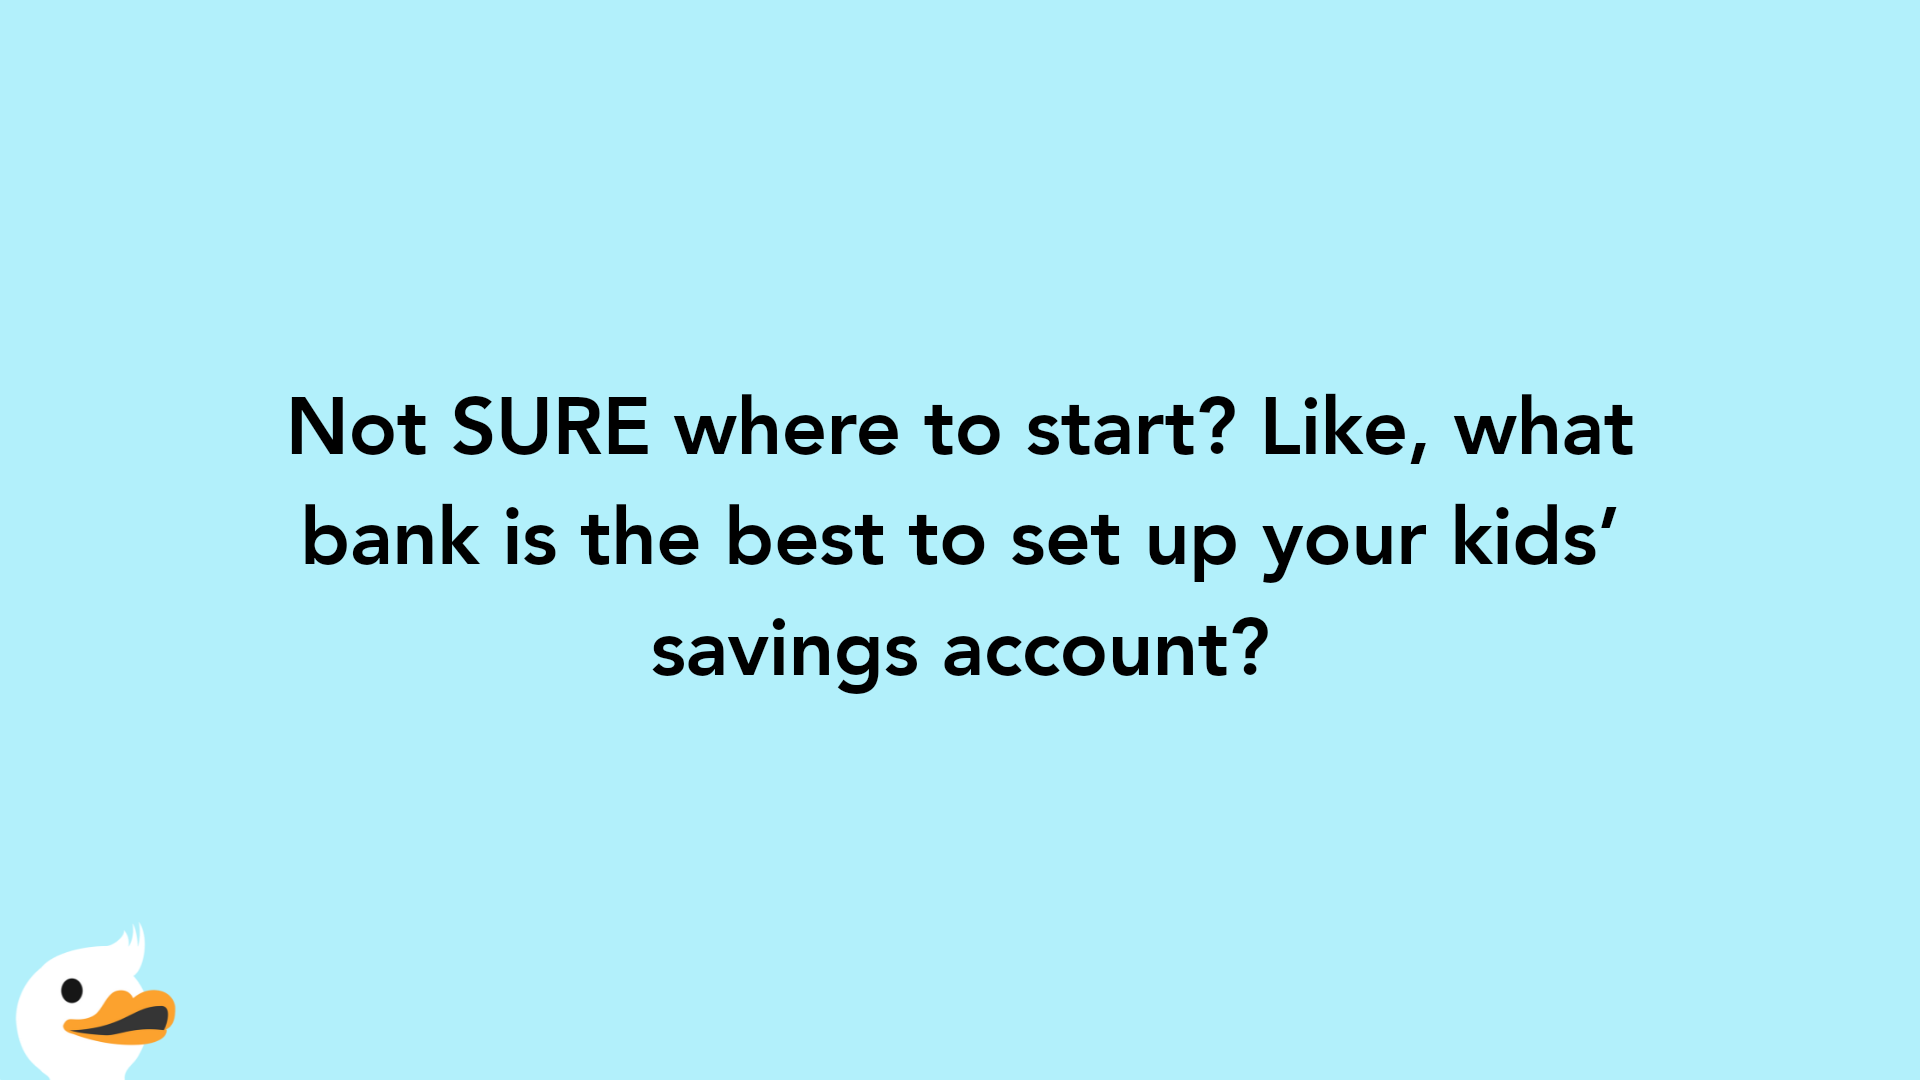 Not SURE where to start? Like, what bank is the best to set up your kids’ savings account?